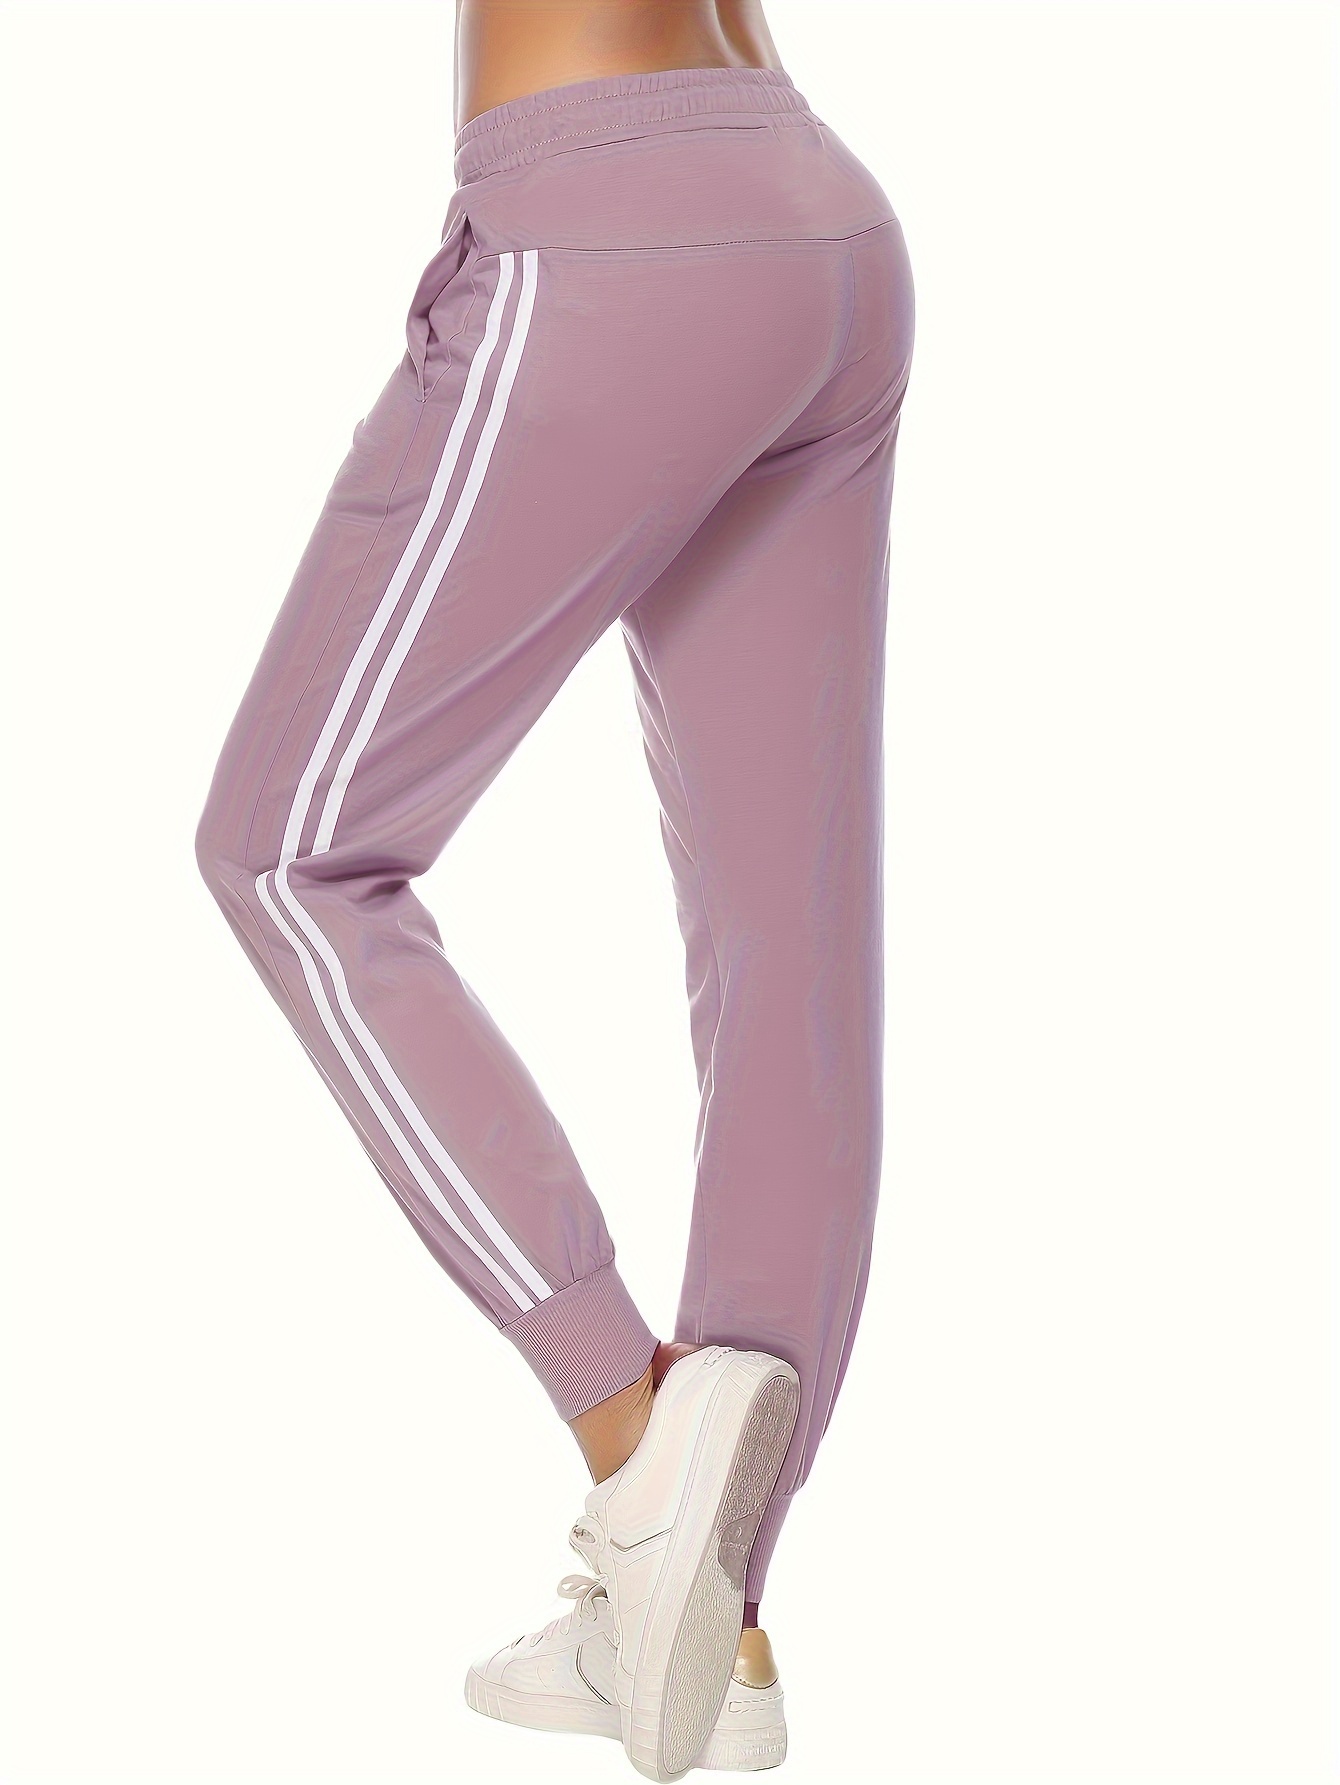 Womens Sweatpants with Pockets Baggy Elastic Waist Pants Loose Fit Comfy  Workout Joggers Light Running Pant Bottoms